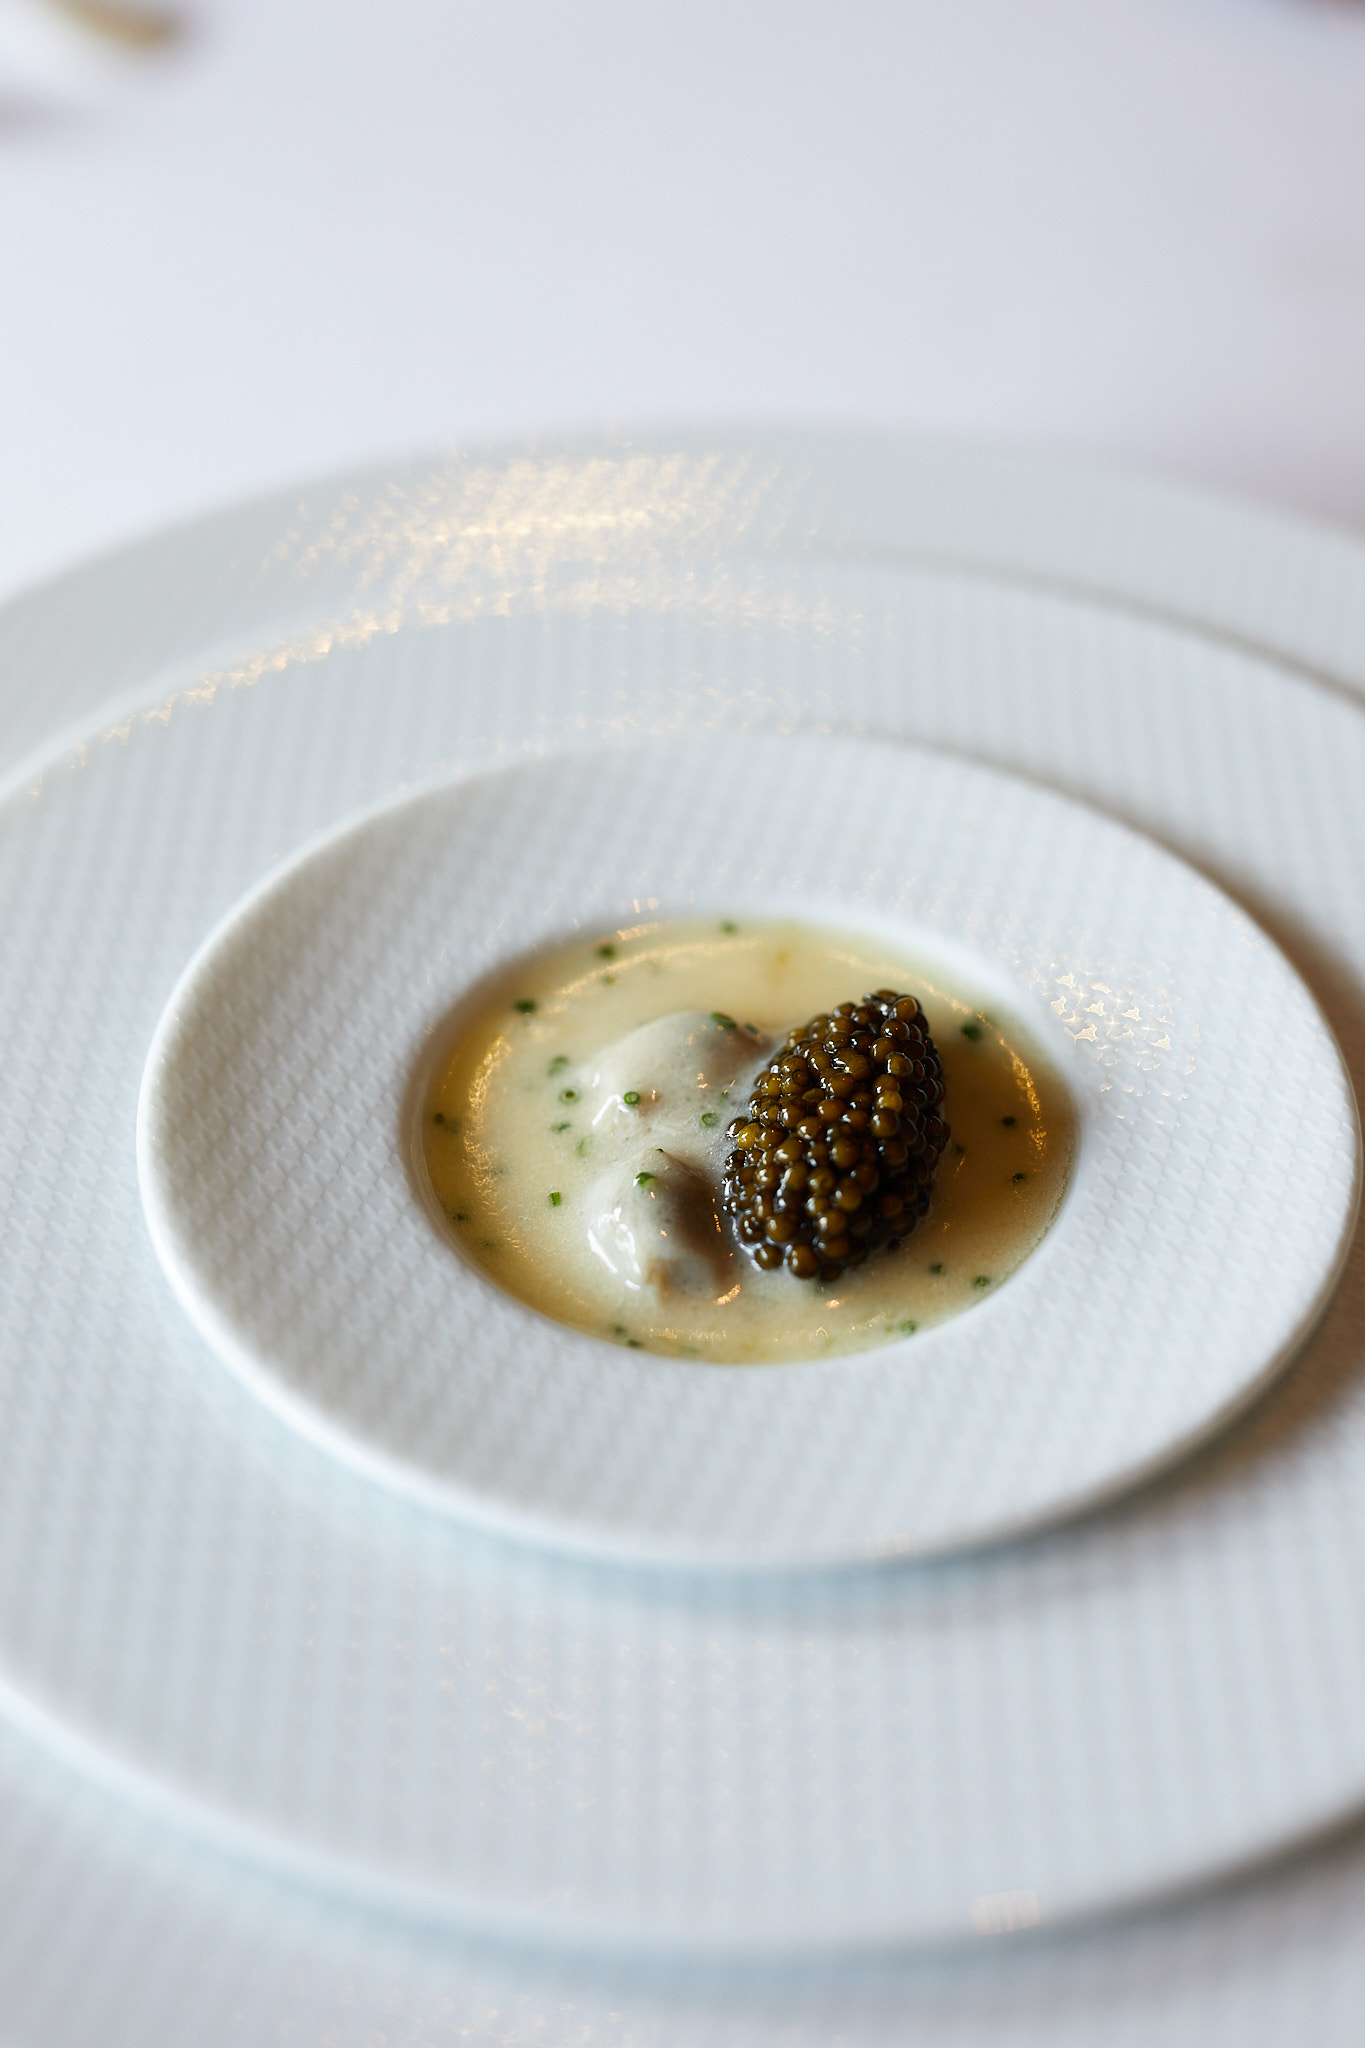 Oysters and Pearls at the French Laundry - John Robson Photography